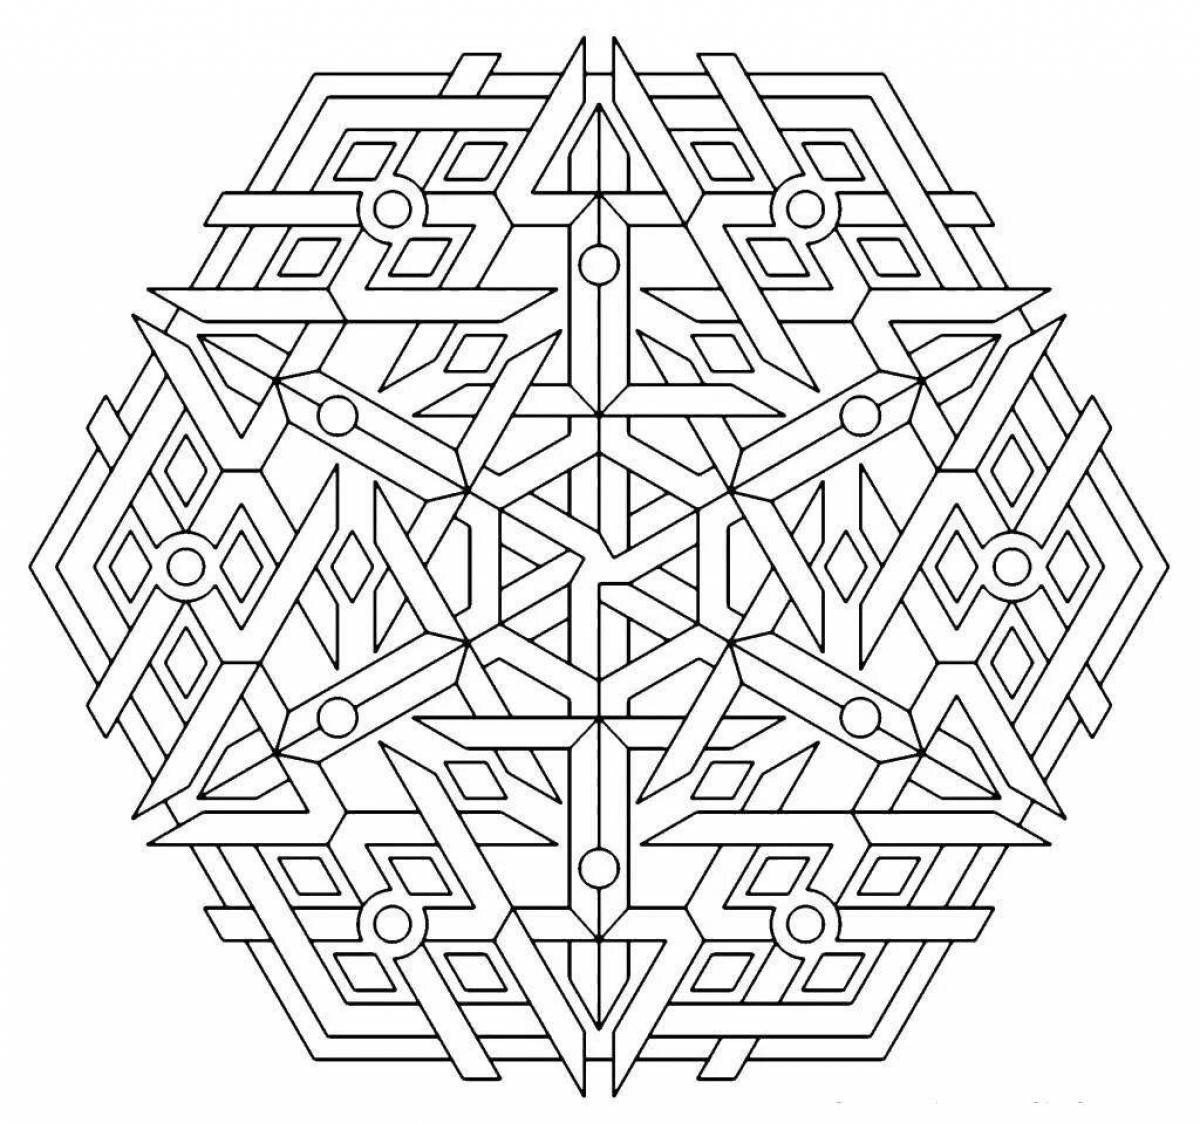 Coloring page with complex geometric pattern